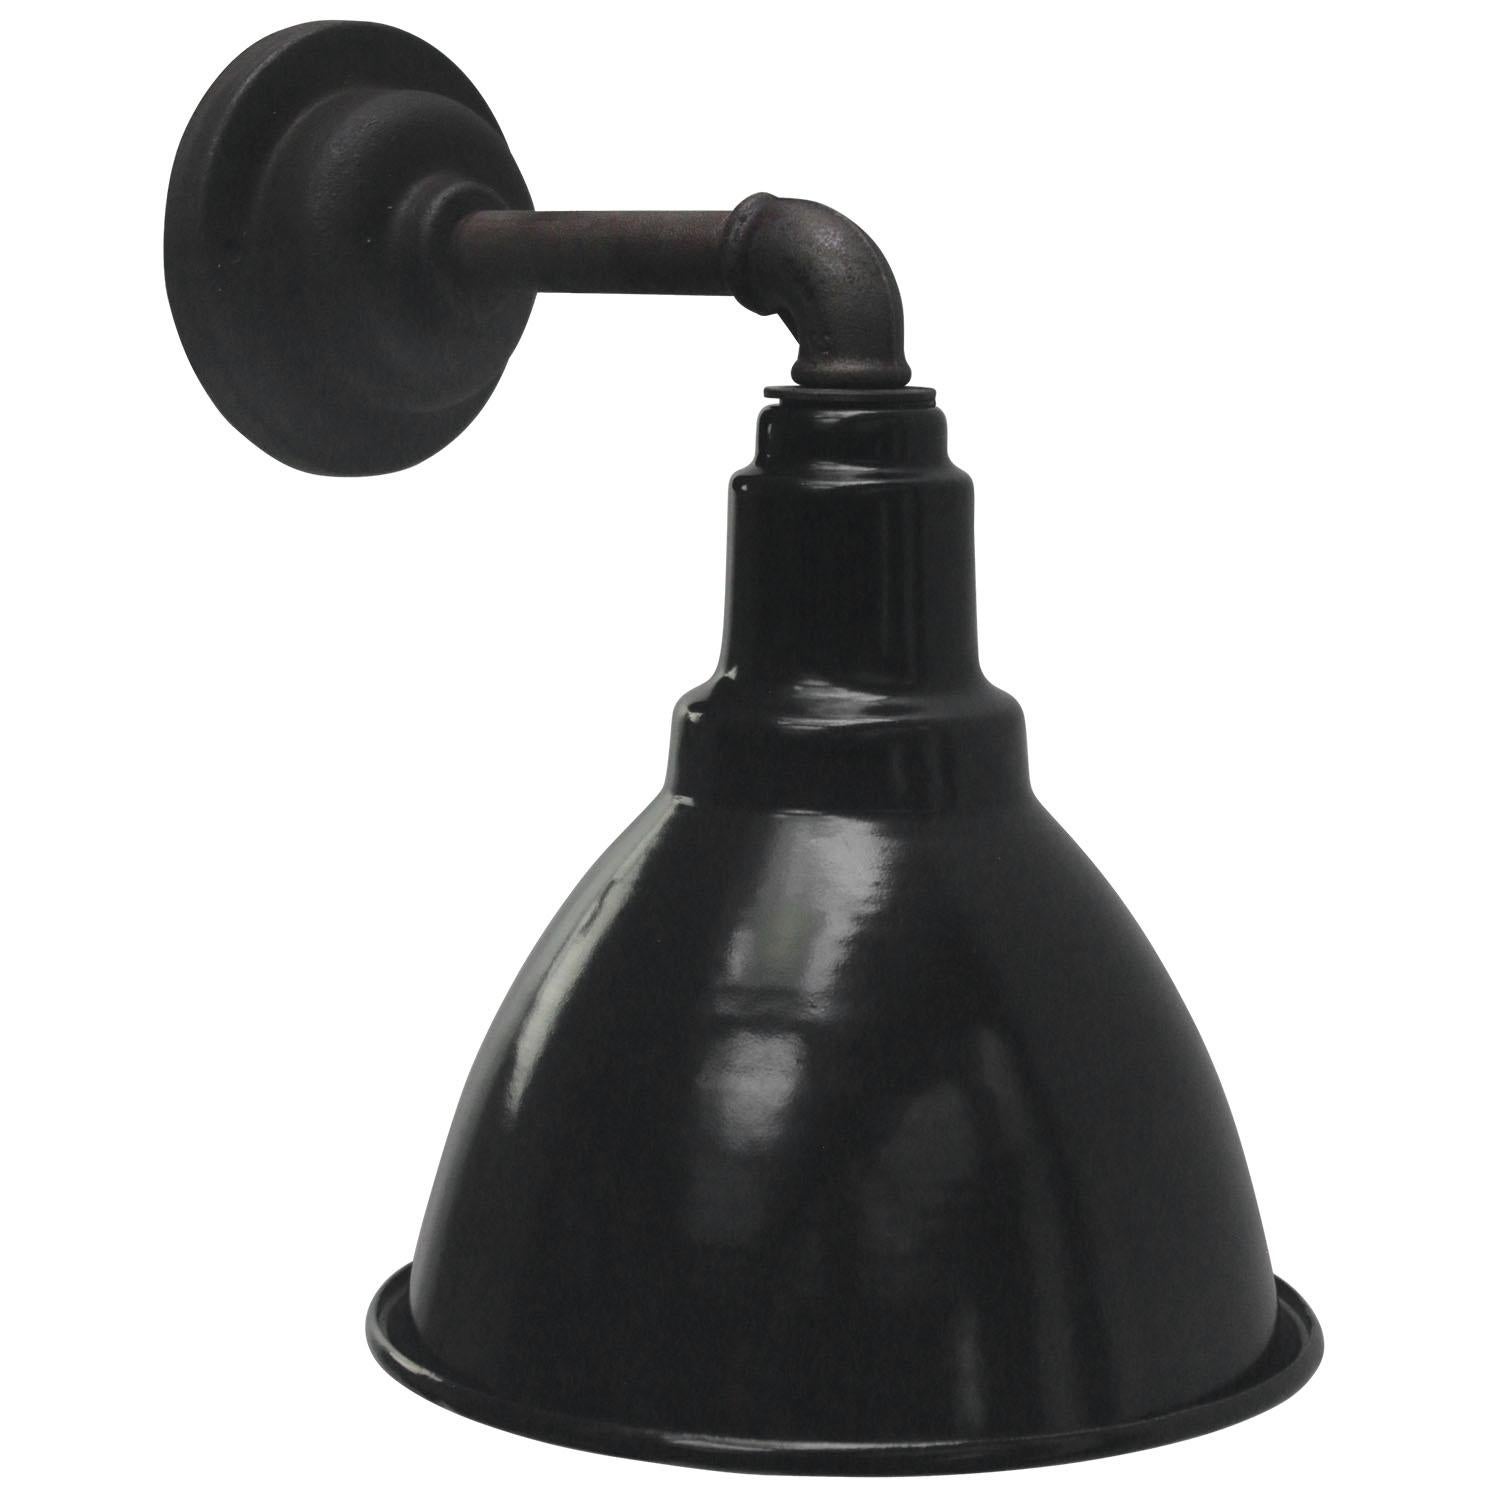 Industrial wall light
Black enamel shade, cast iron arm and wall plate

Diameter cast iron wall piece: 10 cm, 2 holes to secure

Weight: 1.80 kg / 4 lb

Priced per individual item. All lamps have been made suitable by international standards